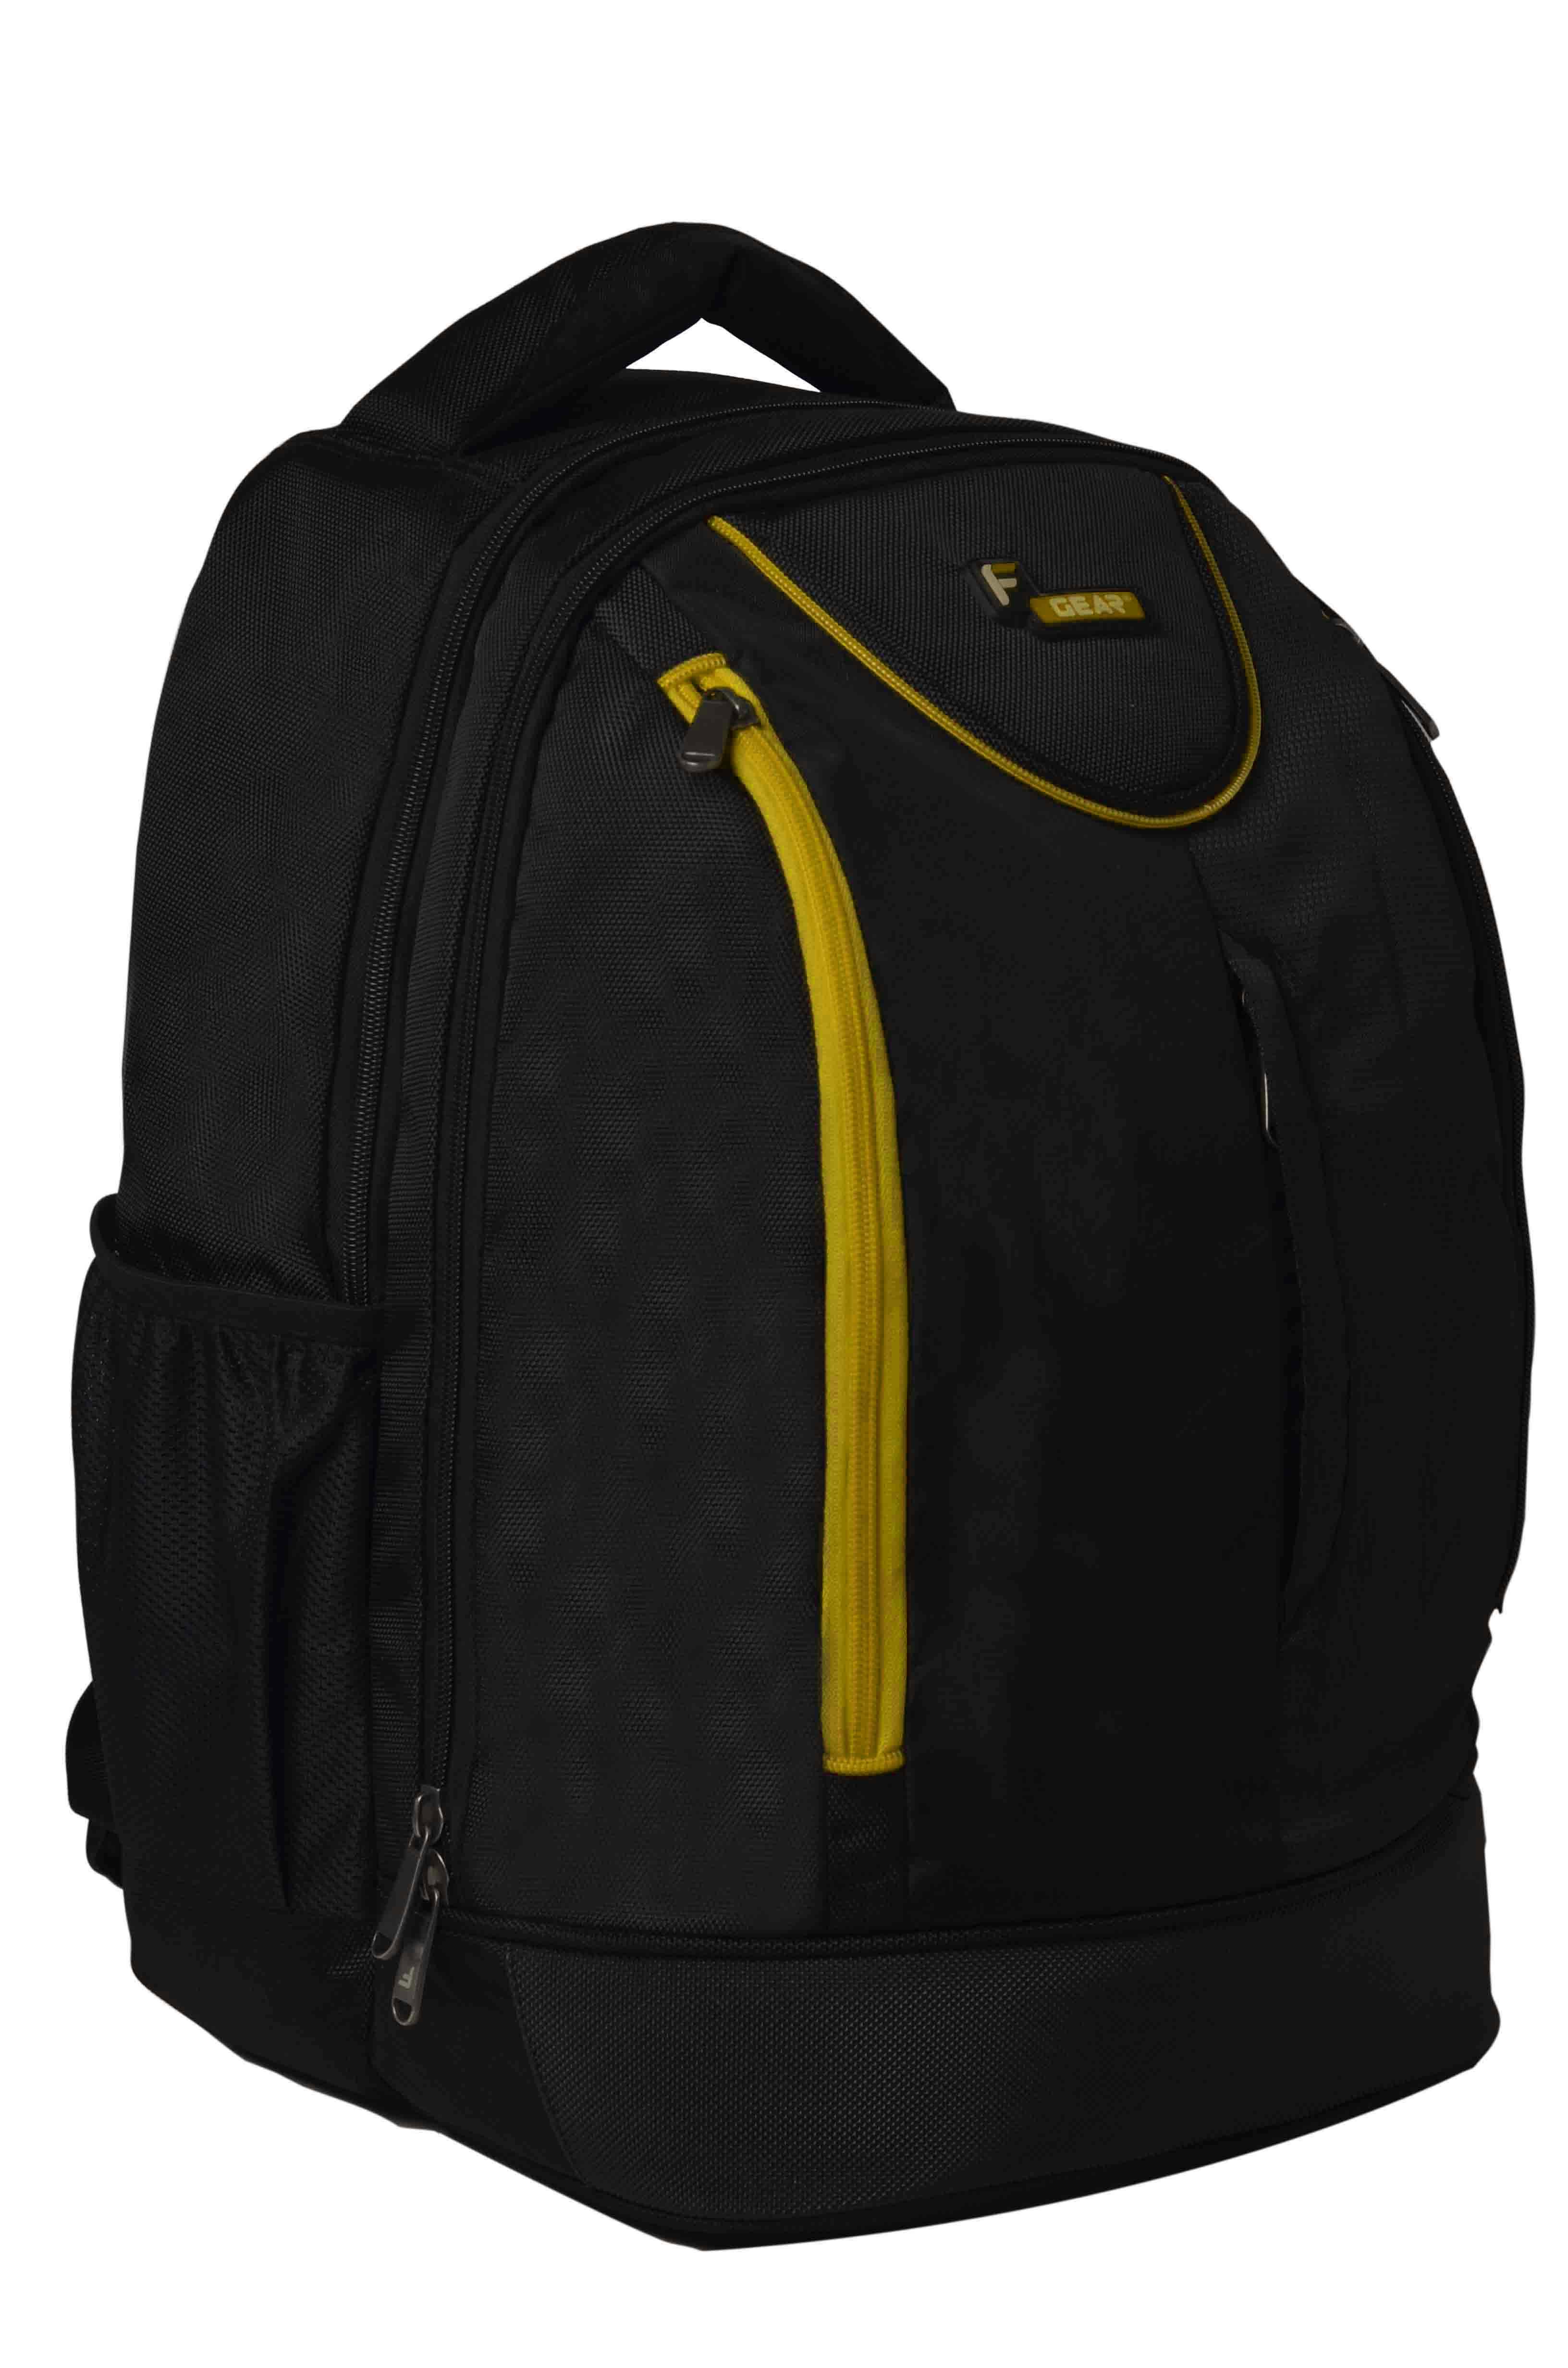 Buy F Gear Booster V2 43 Liters Laptop Backpack Sch Bag(Black,Yellow ...